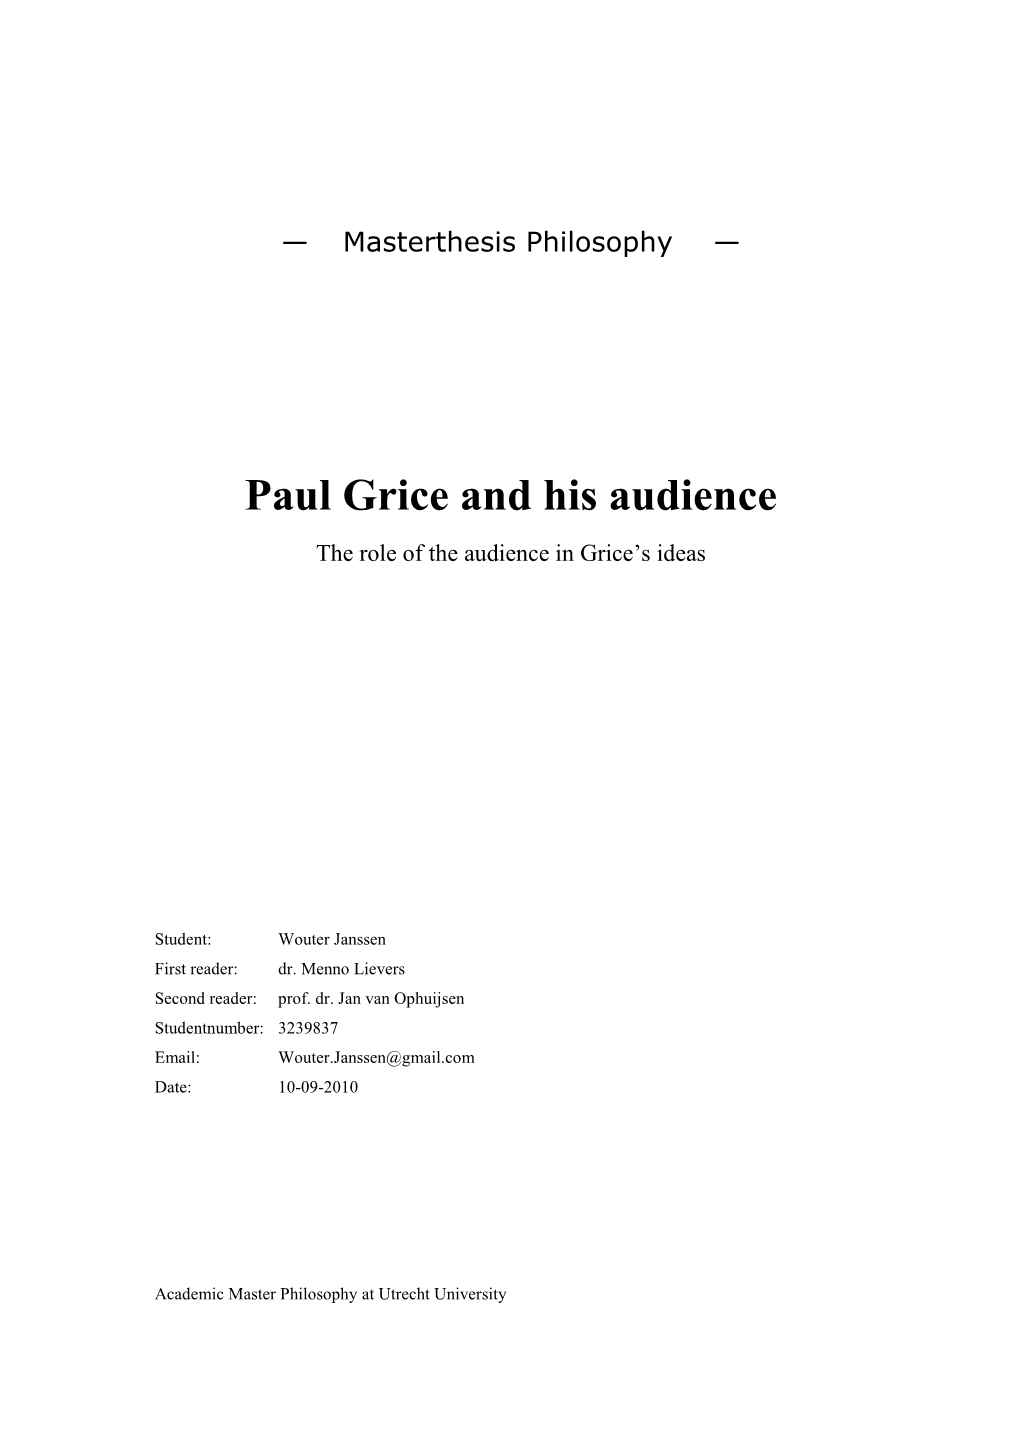 Paul Grice and His Audience